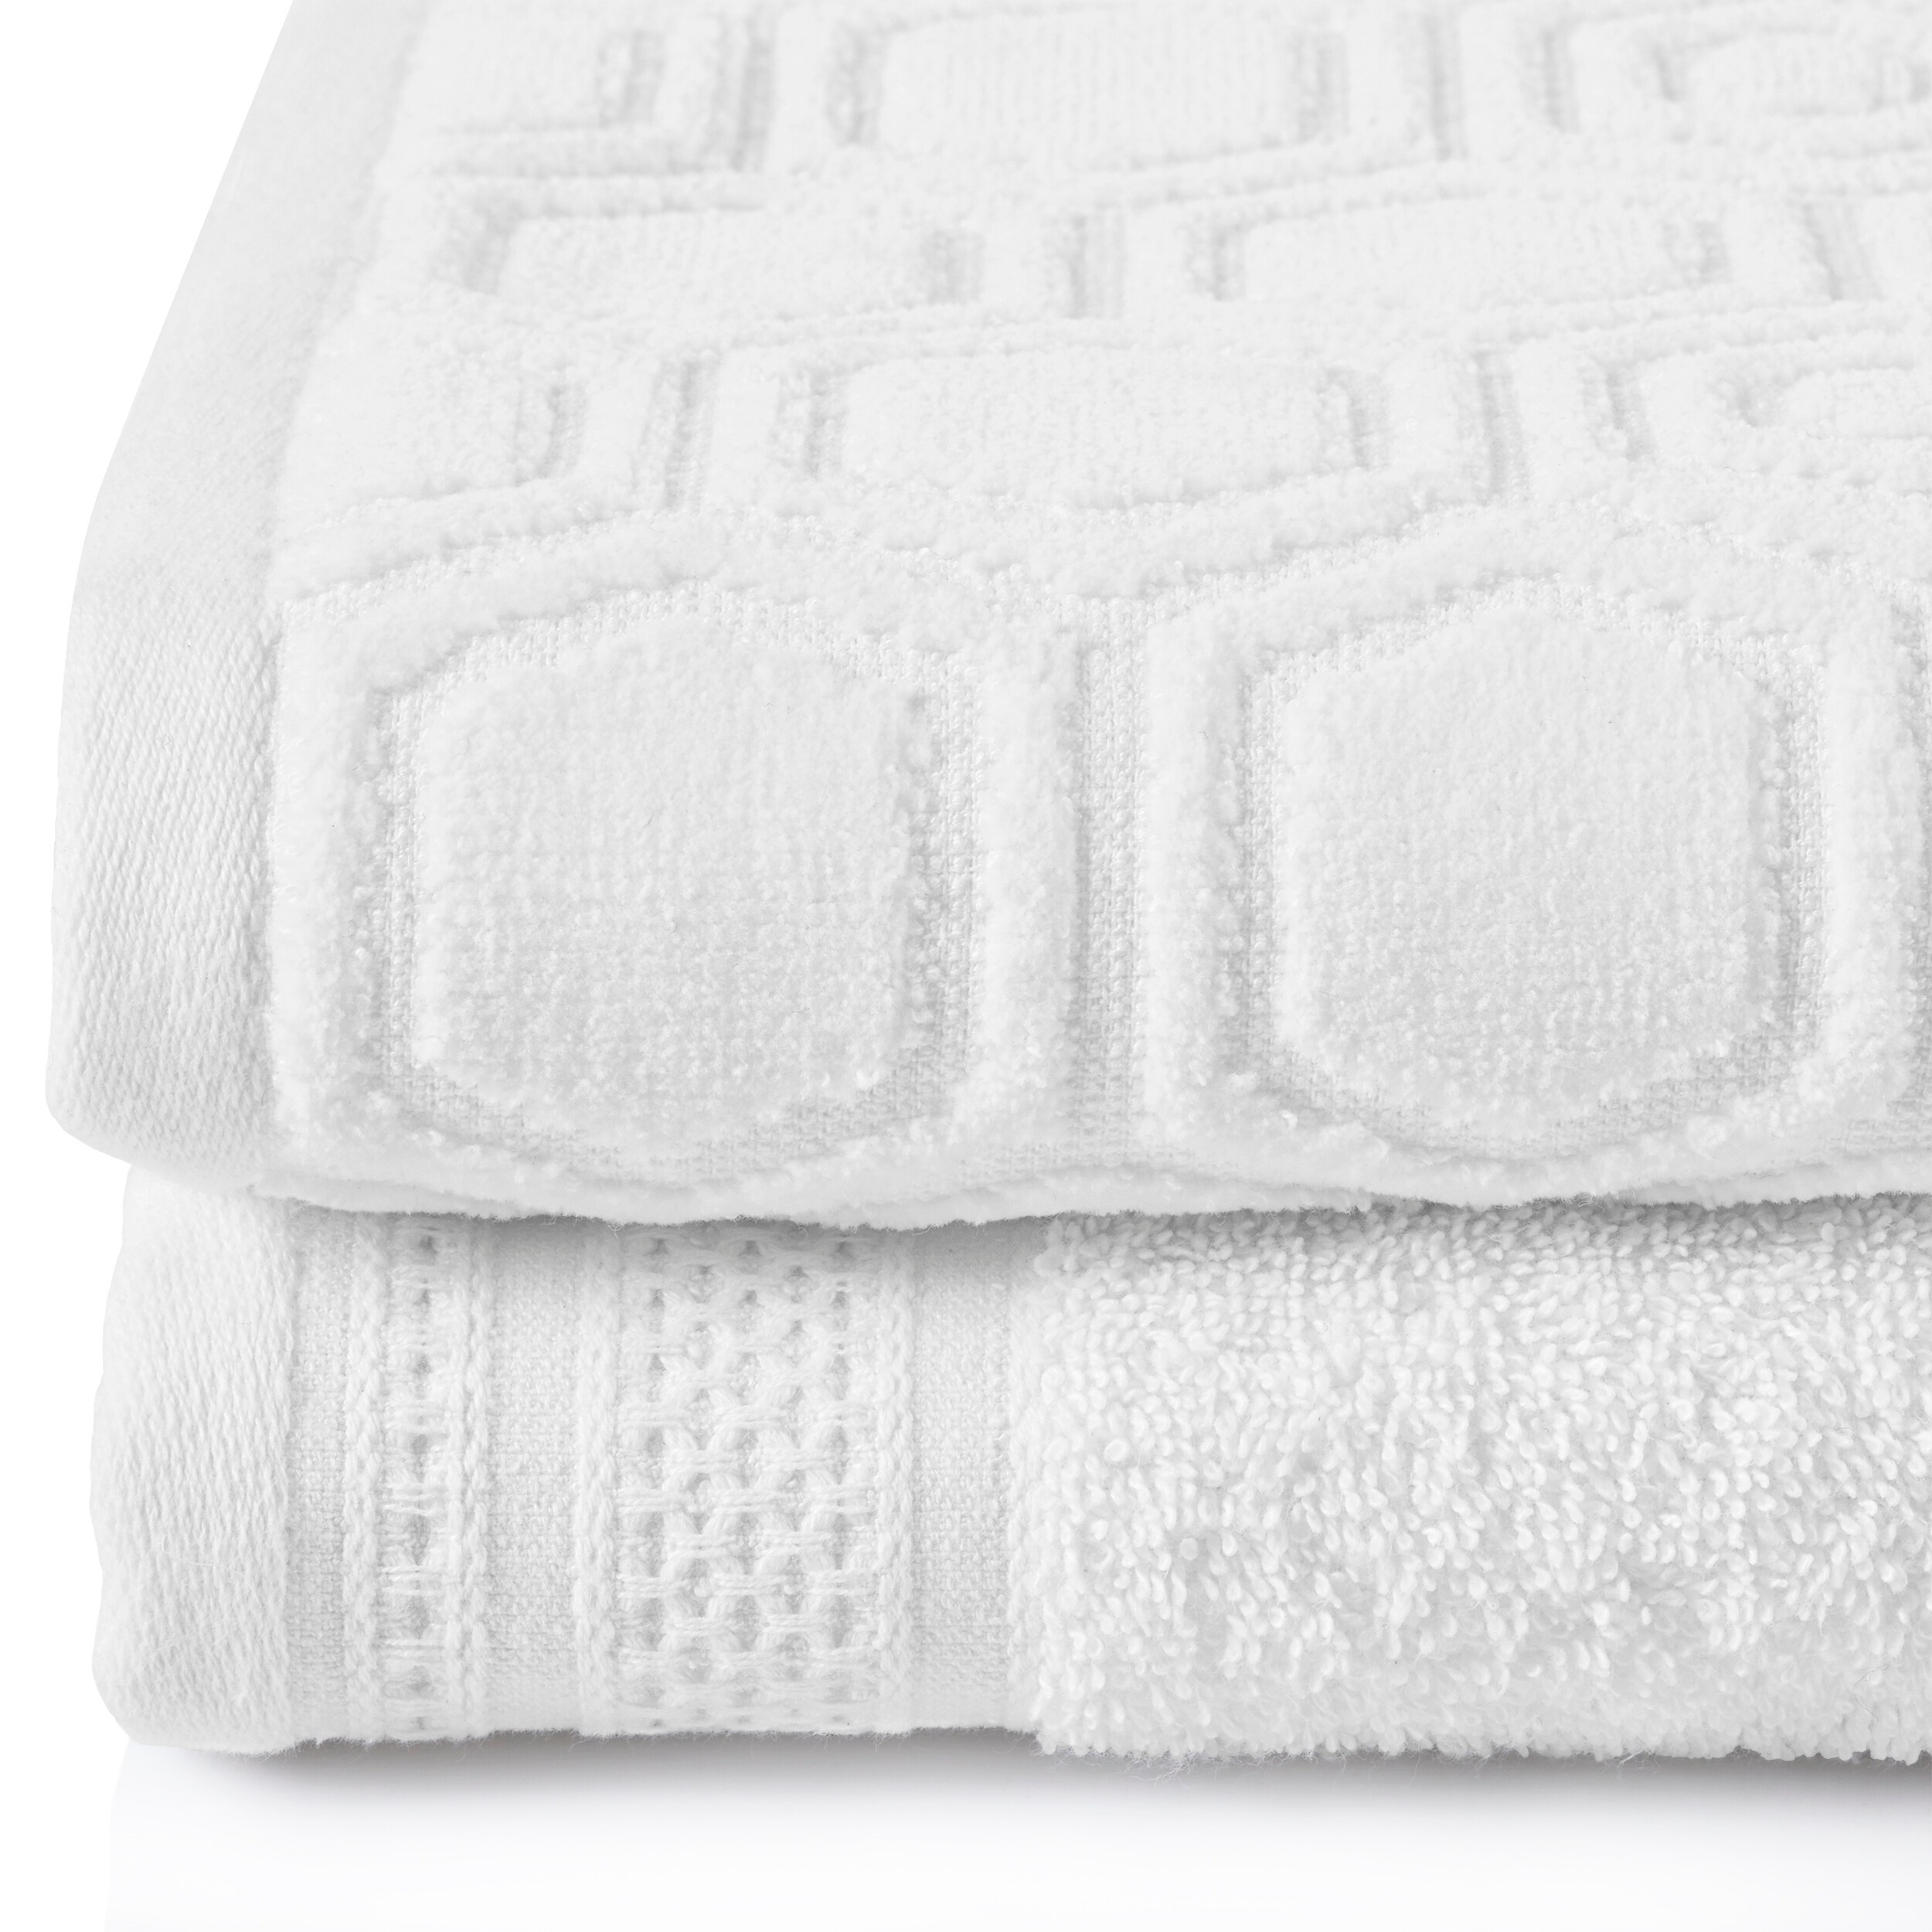 https://ak1.ostkcdn.com/images/products/is/images/direct/bcba43709cd24f1b423891eed26891c4d41eec39/Combed-Cotton-Highly-Absorbent-12-Piece-Towel-Set-by-Miranda-Haus.jpg